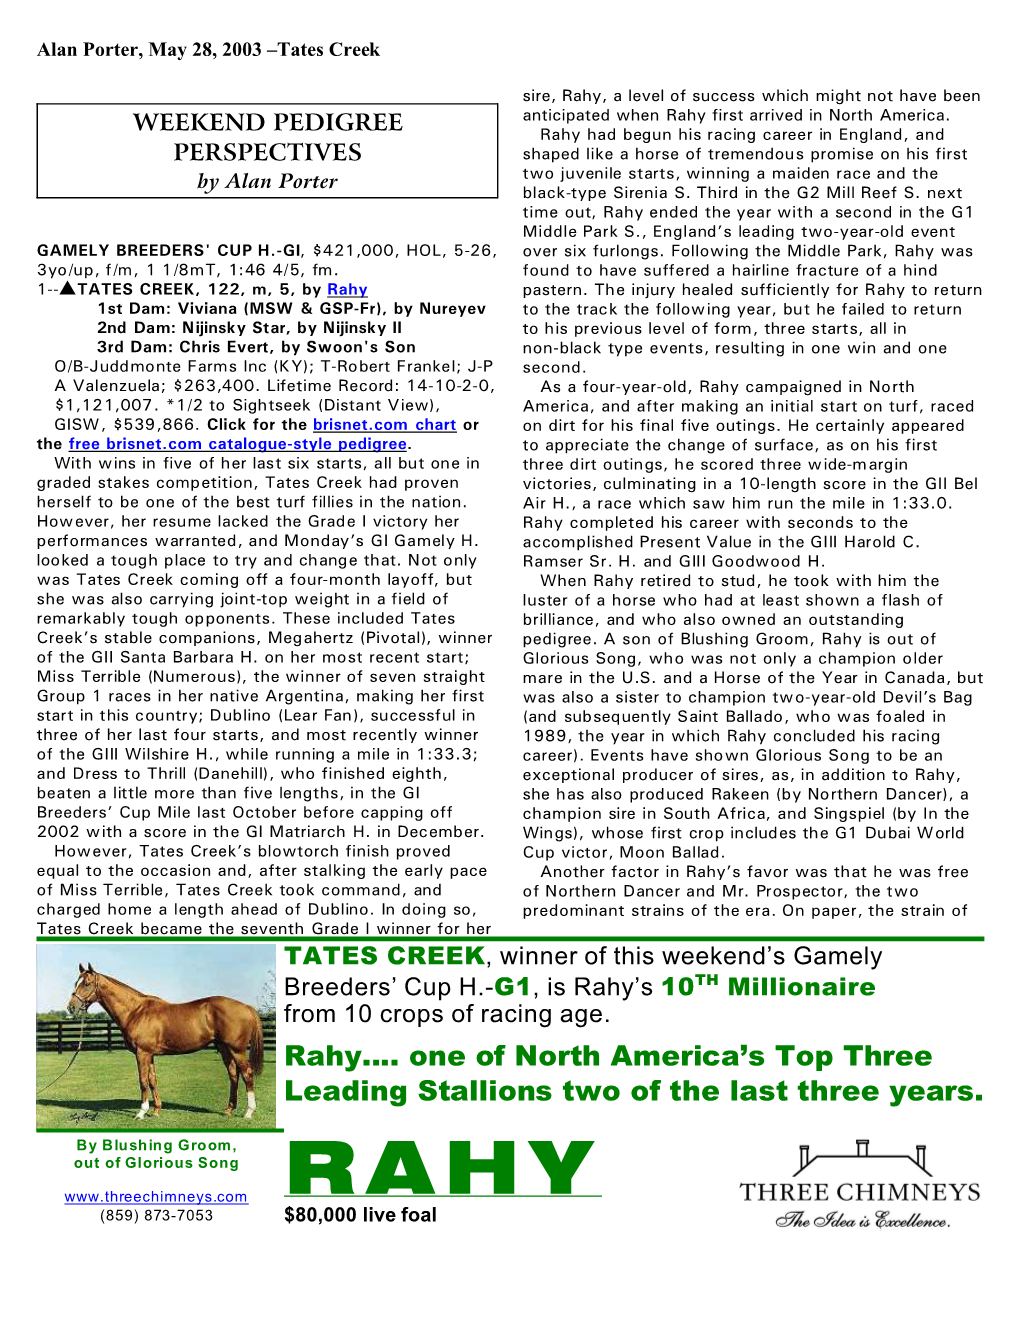 Rahy...One of North America's Top Three Leading Stallions Two of The